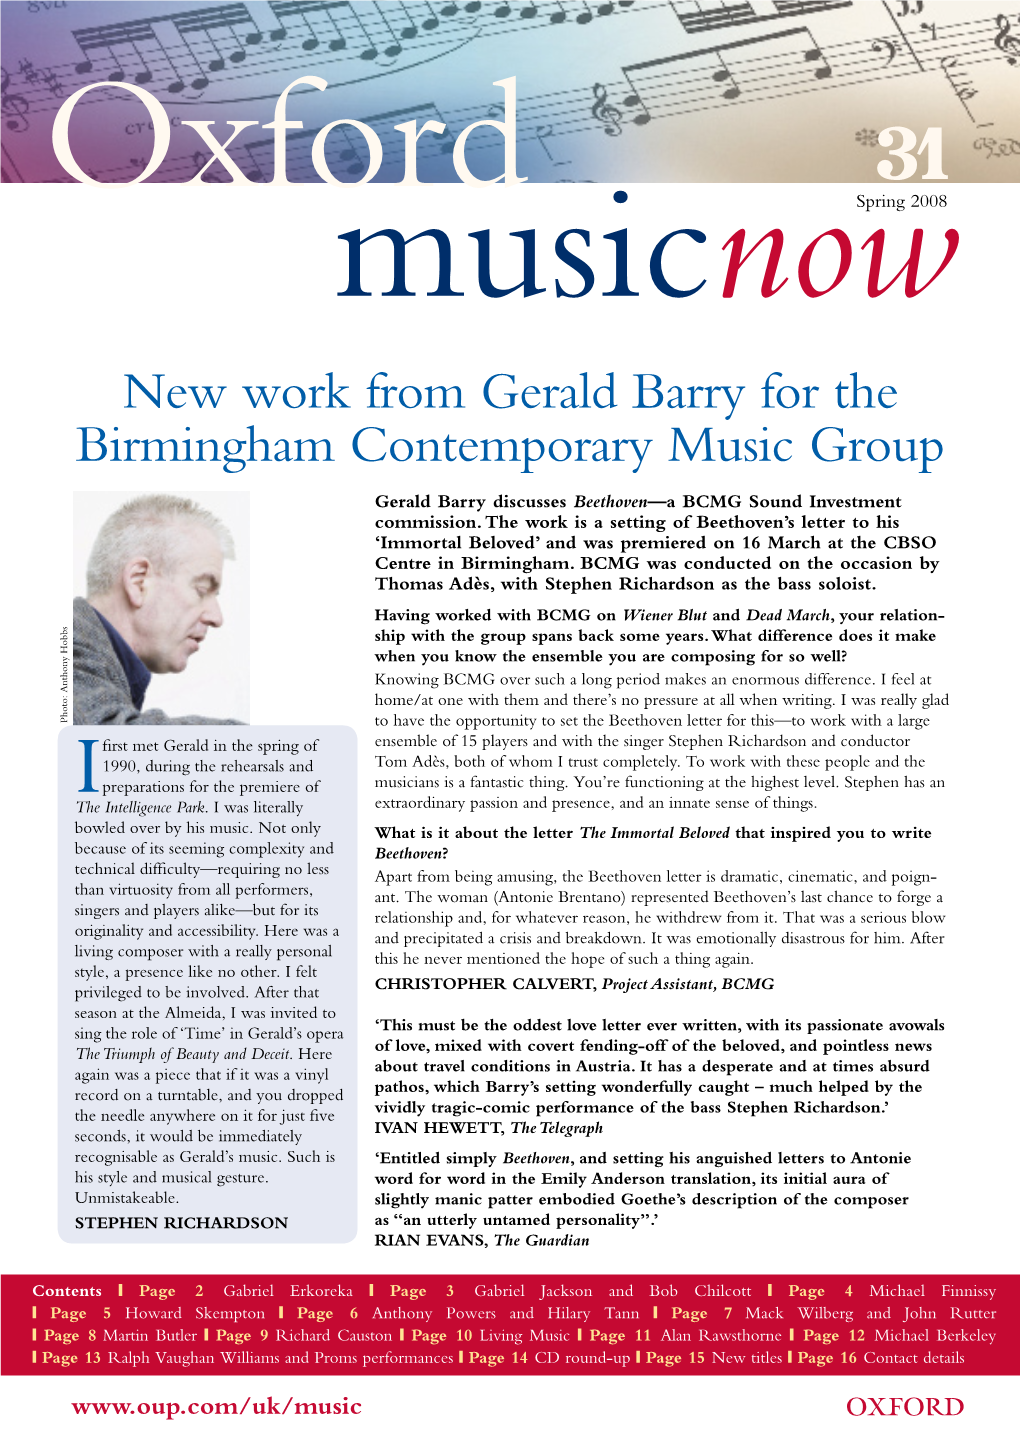 New Work from Gerald Barry for the Birmingham Contemporary Music Group